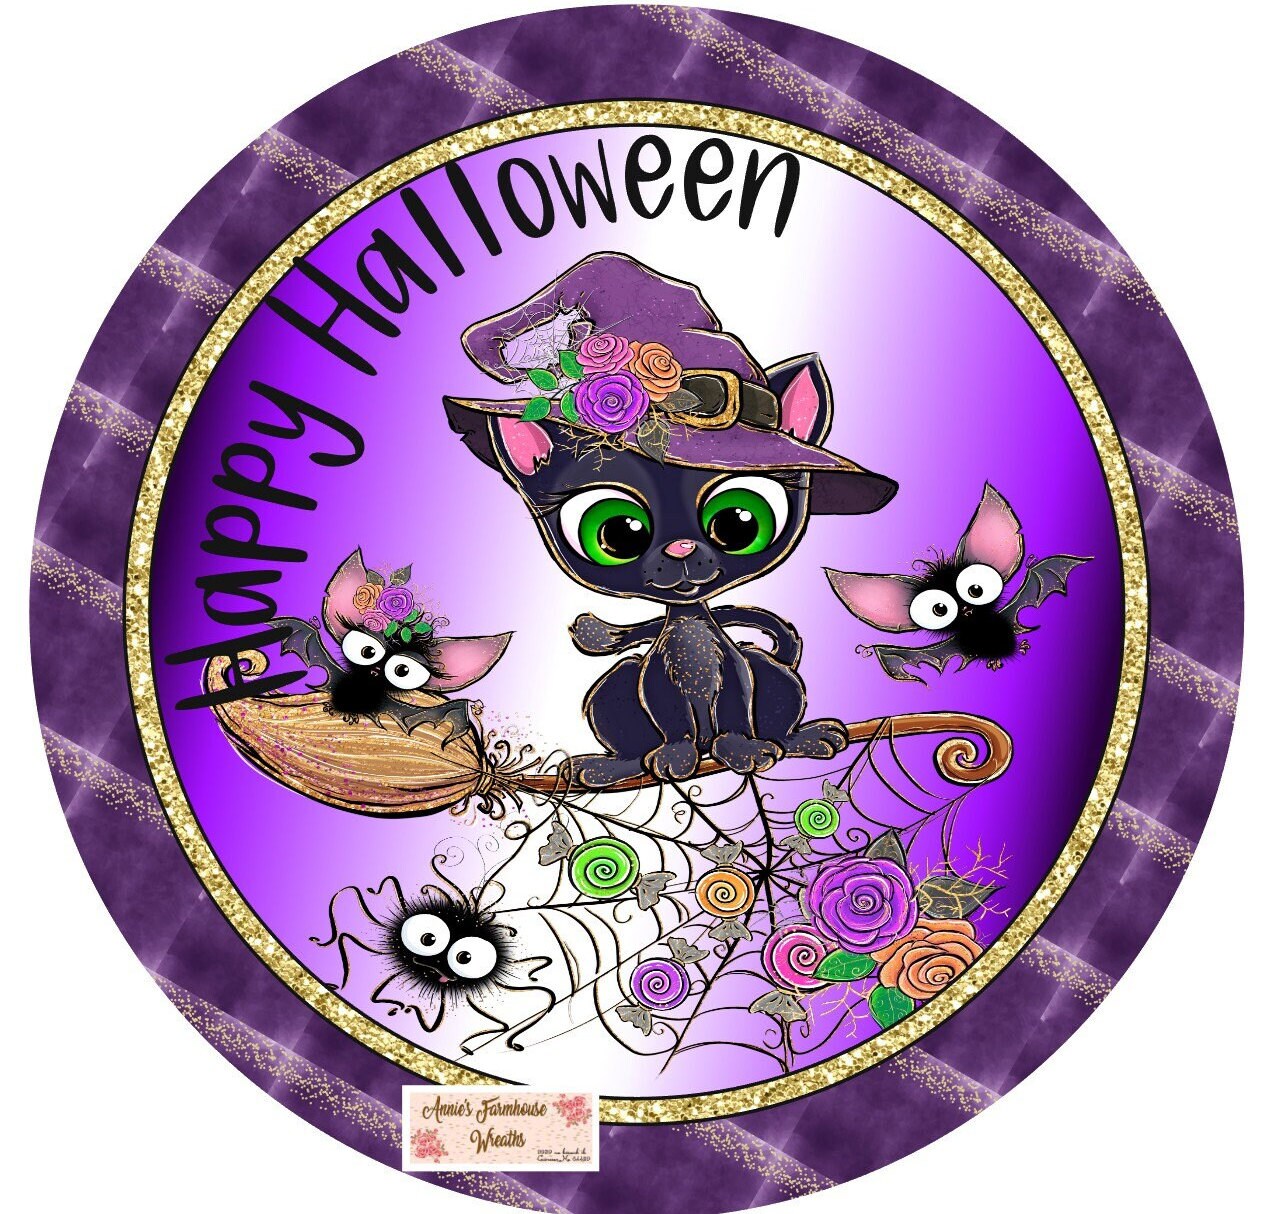 wreath sign, Whimsical black with cat, spider, purple and gold round sublimated wreath sign